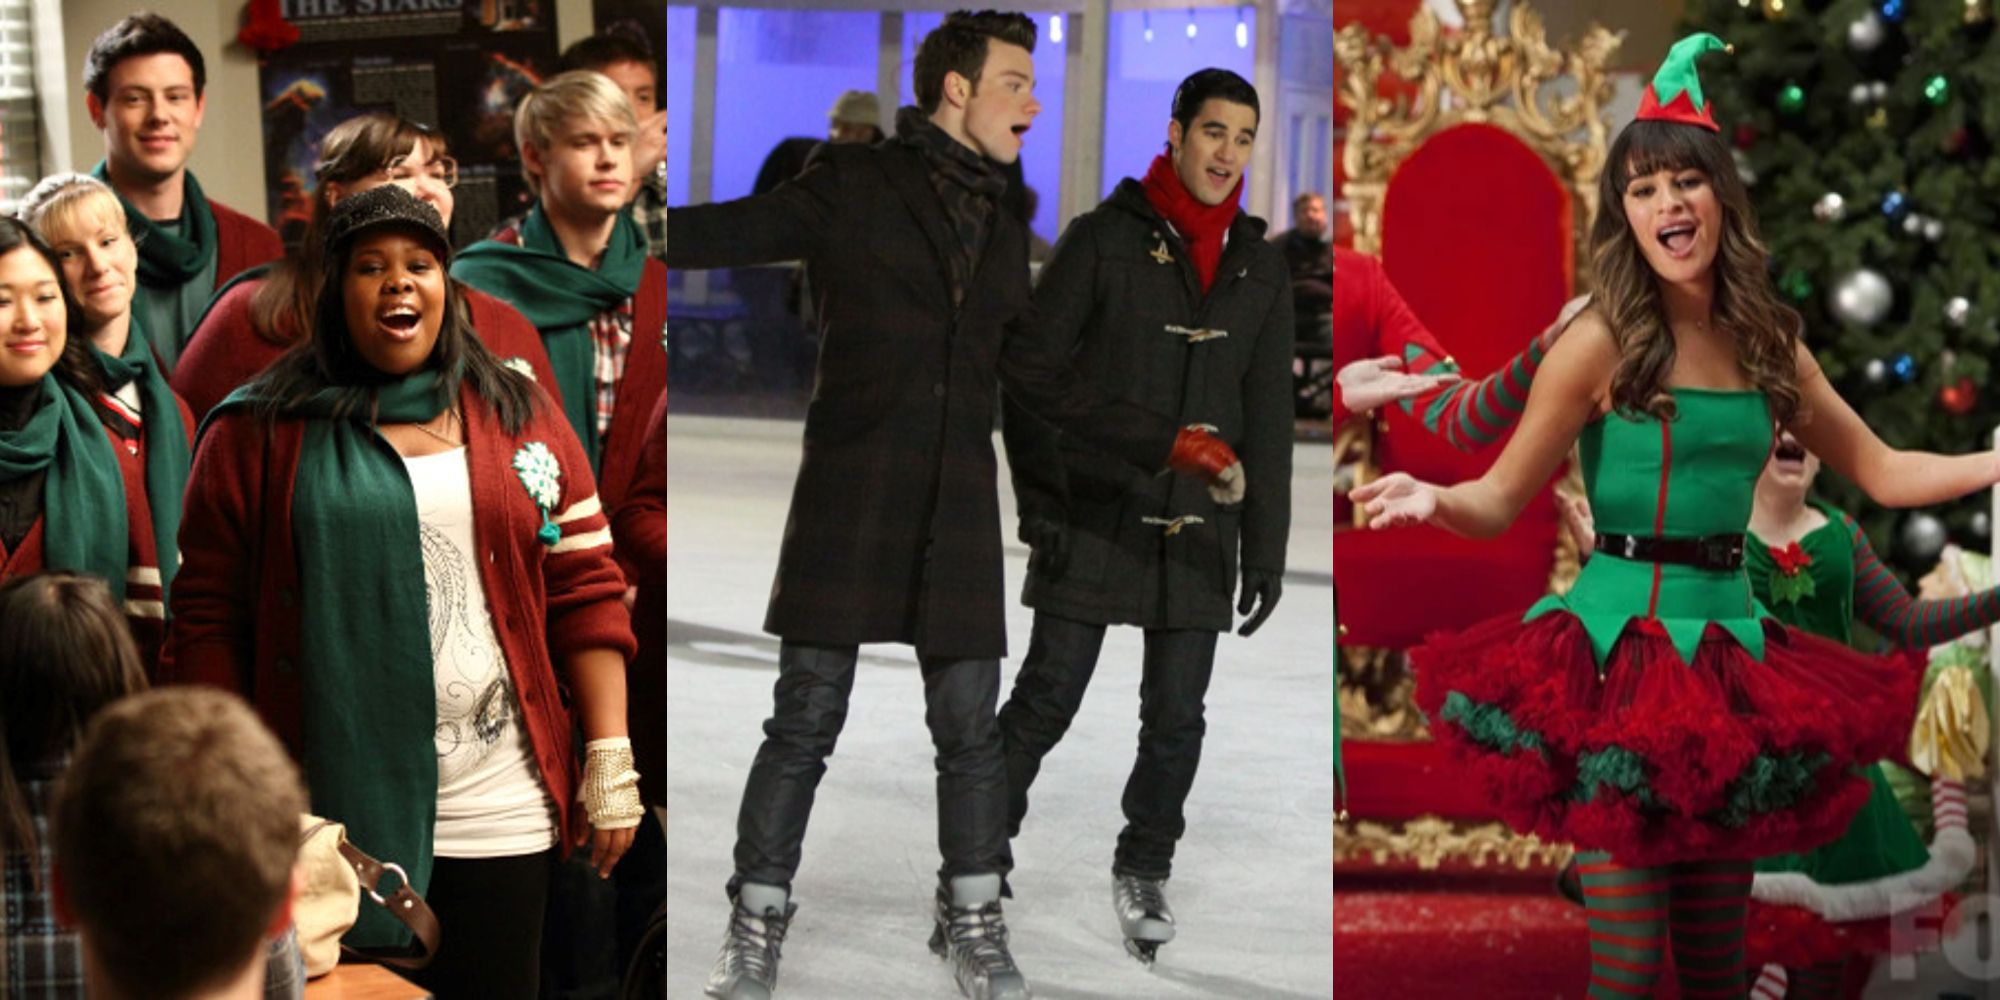 The cast singing Christmas songs in Glee